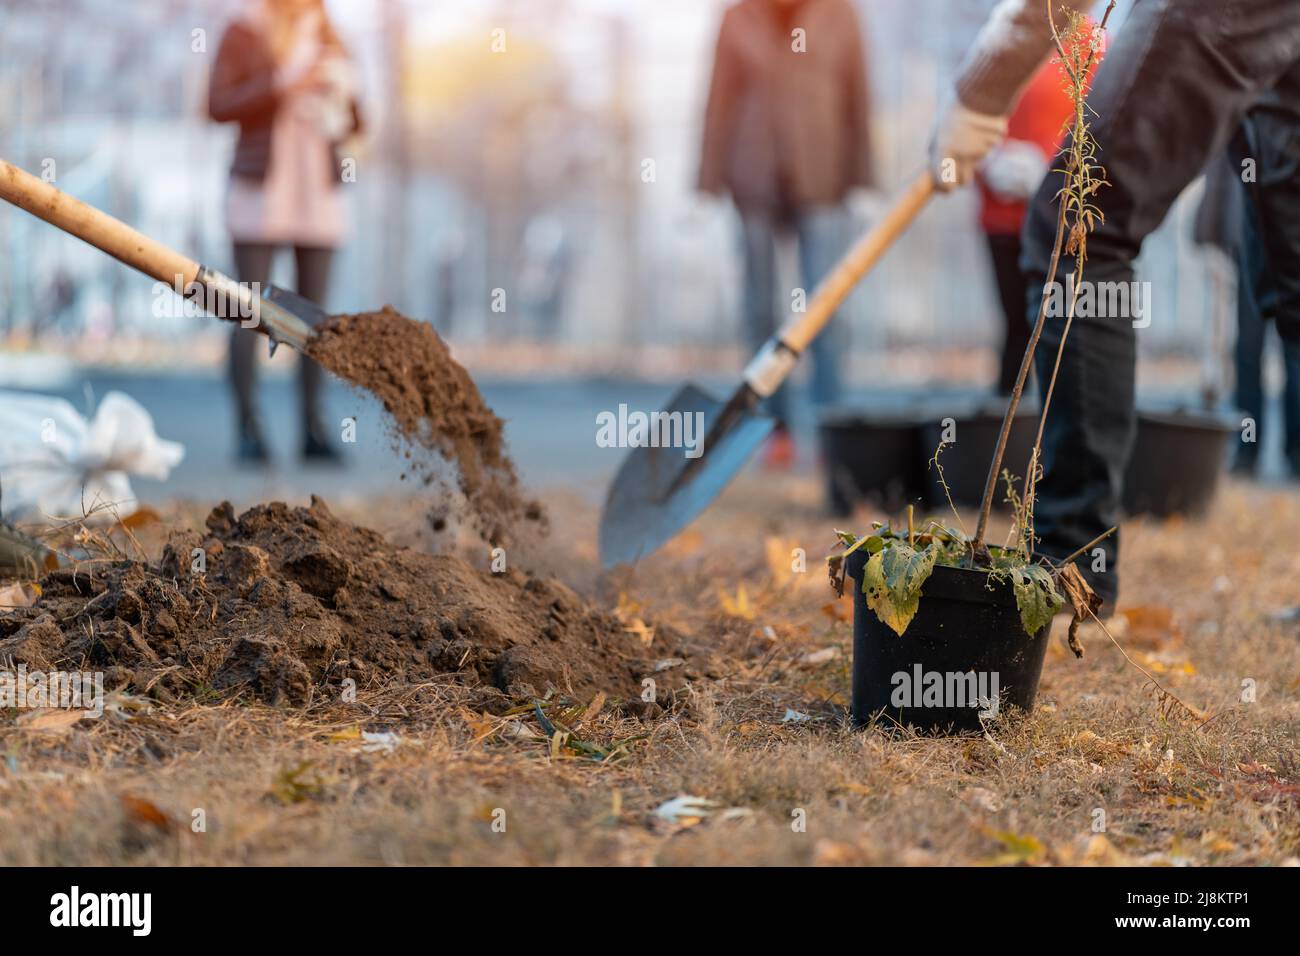 planting new trees with gardening tools or man hand with shovel digging ground Stock Photo